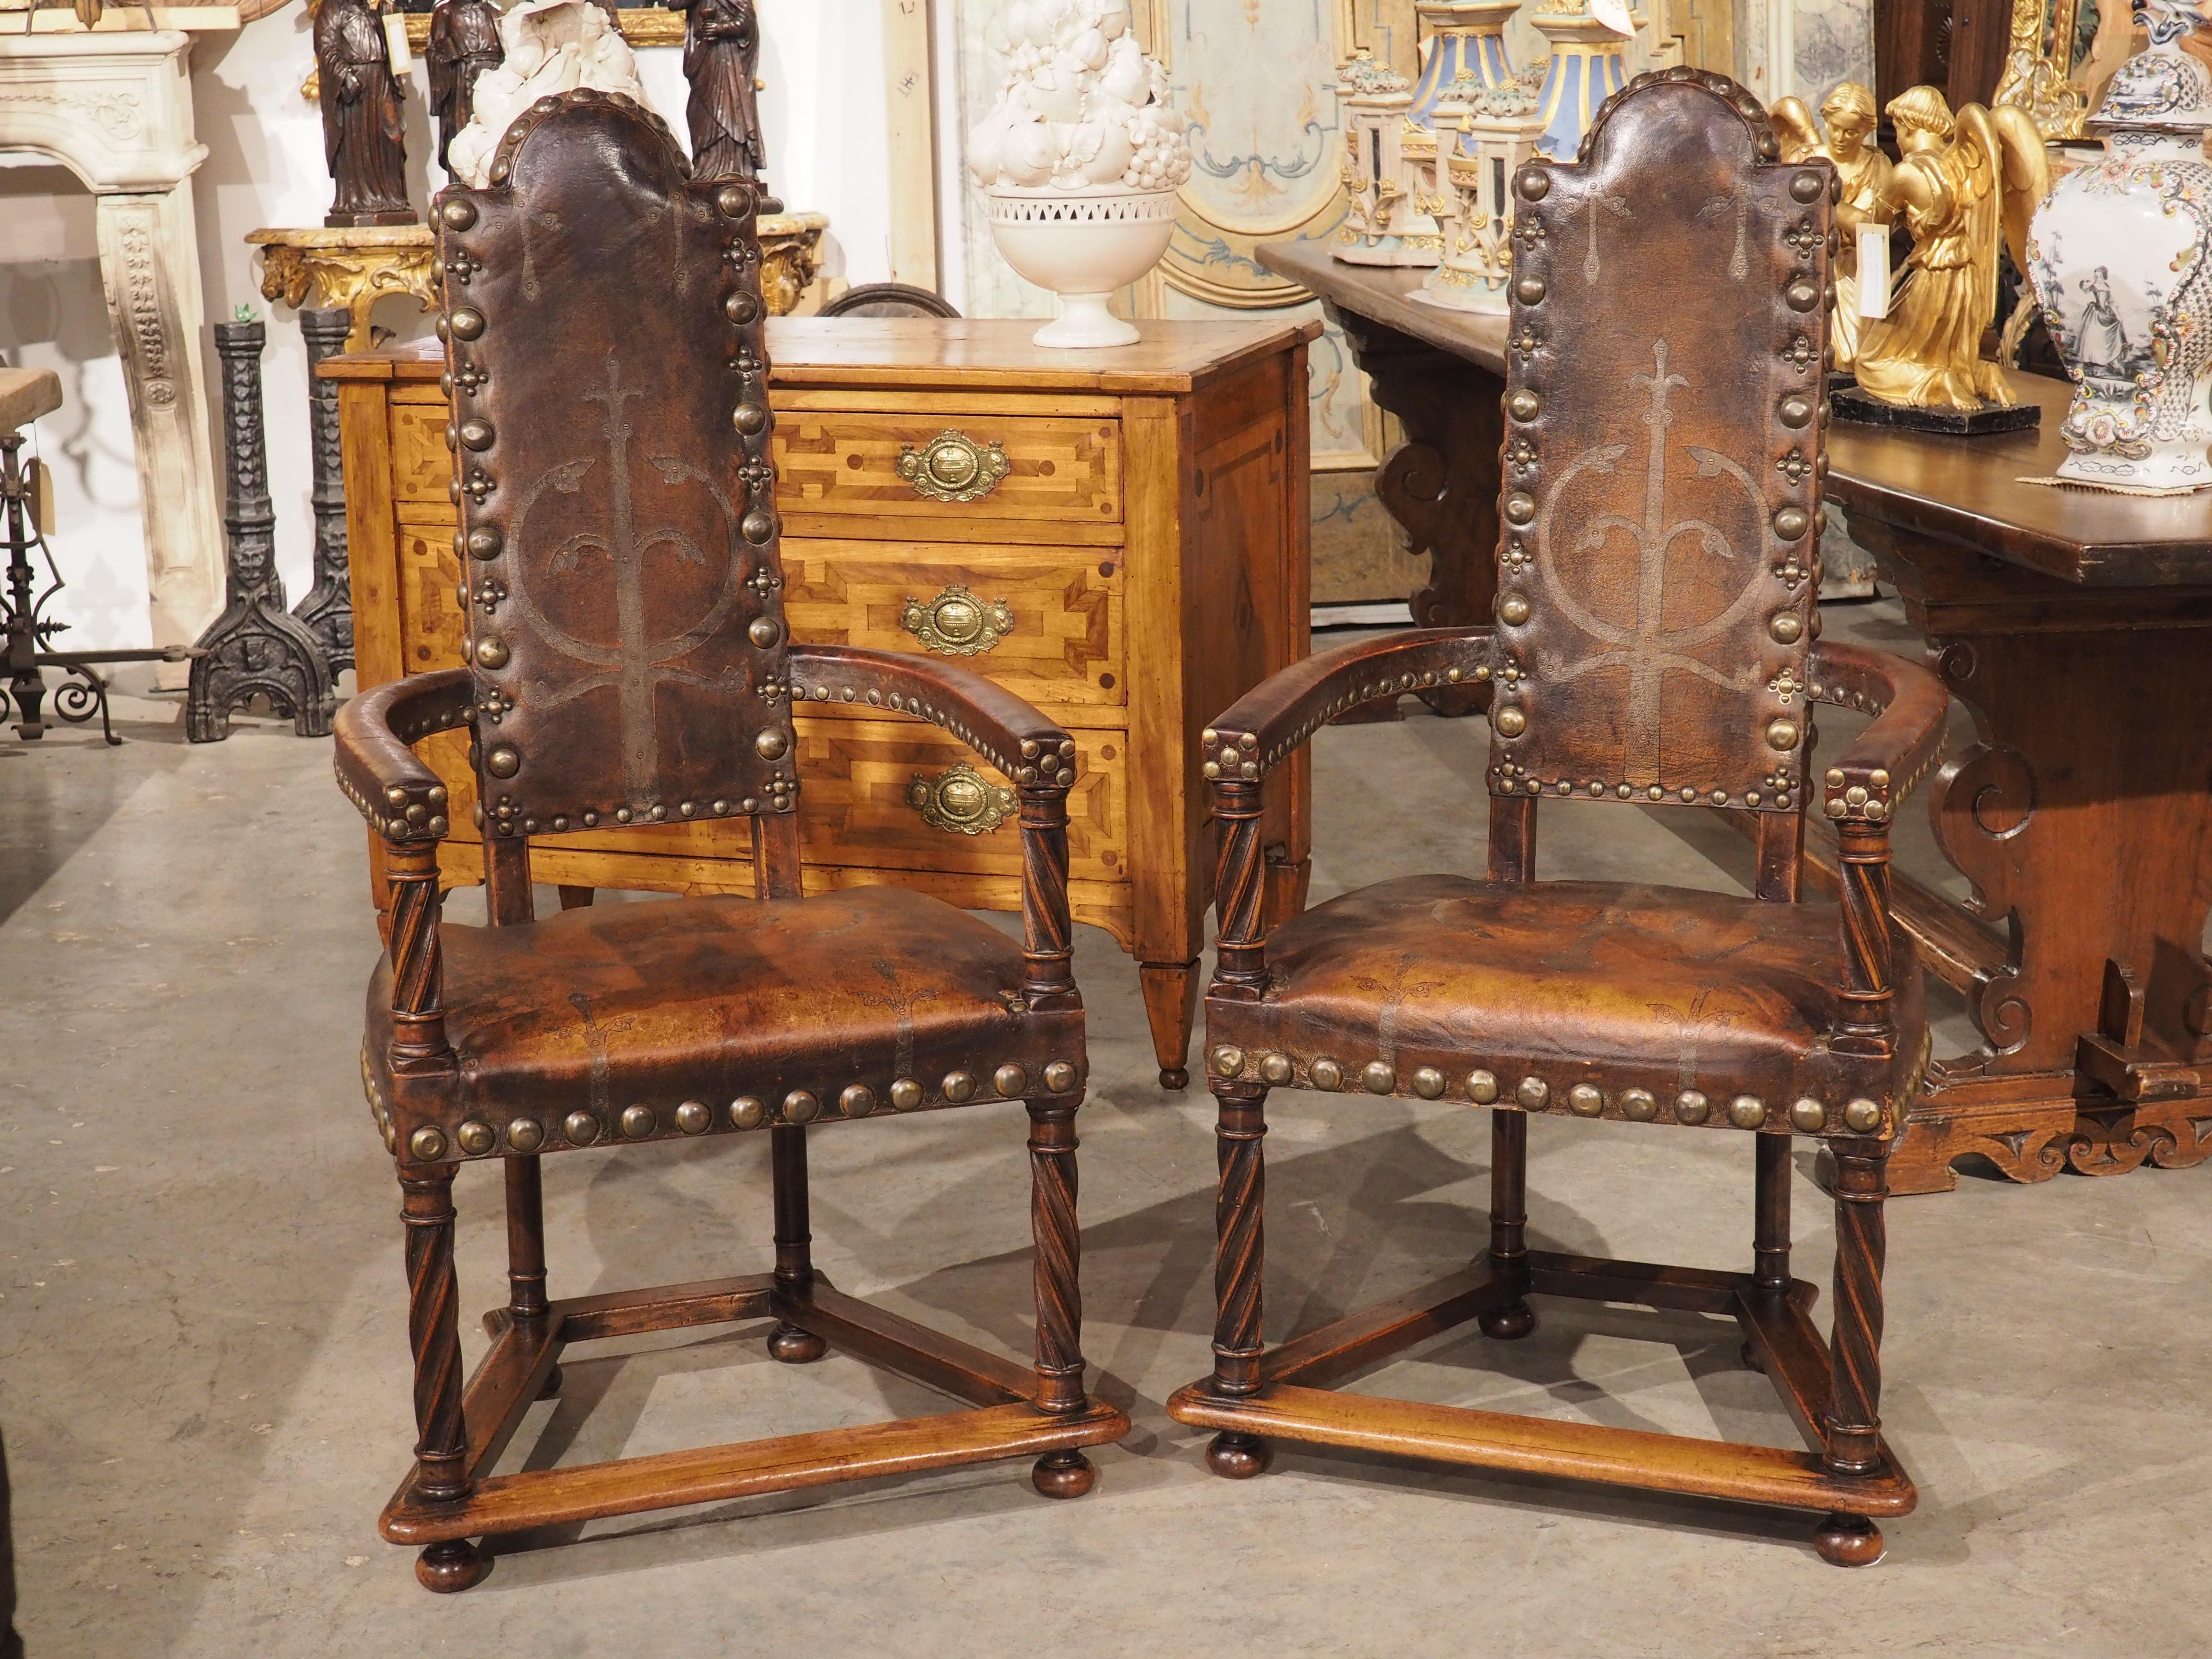 Spanish A Unique Pair of 19th Century Studded Leather Armchairs from Spain